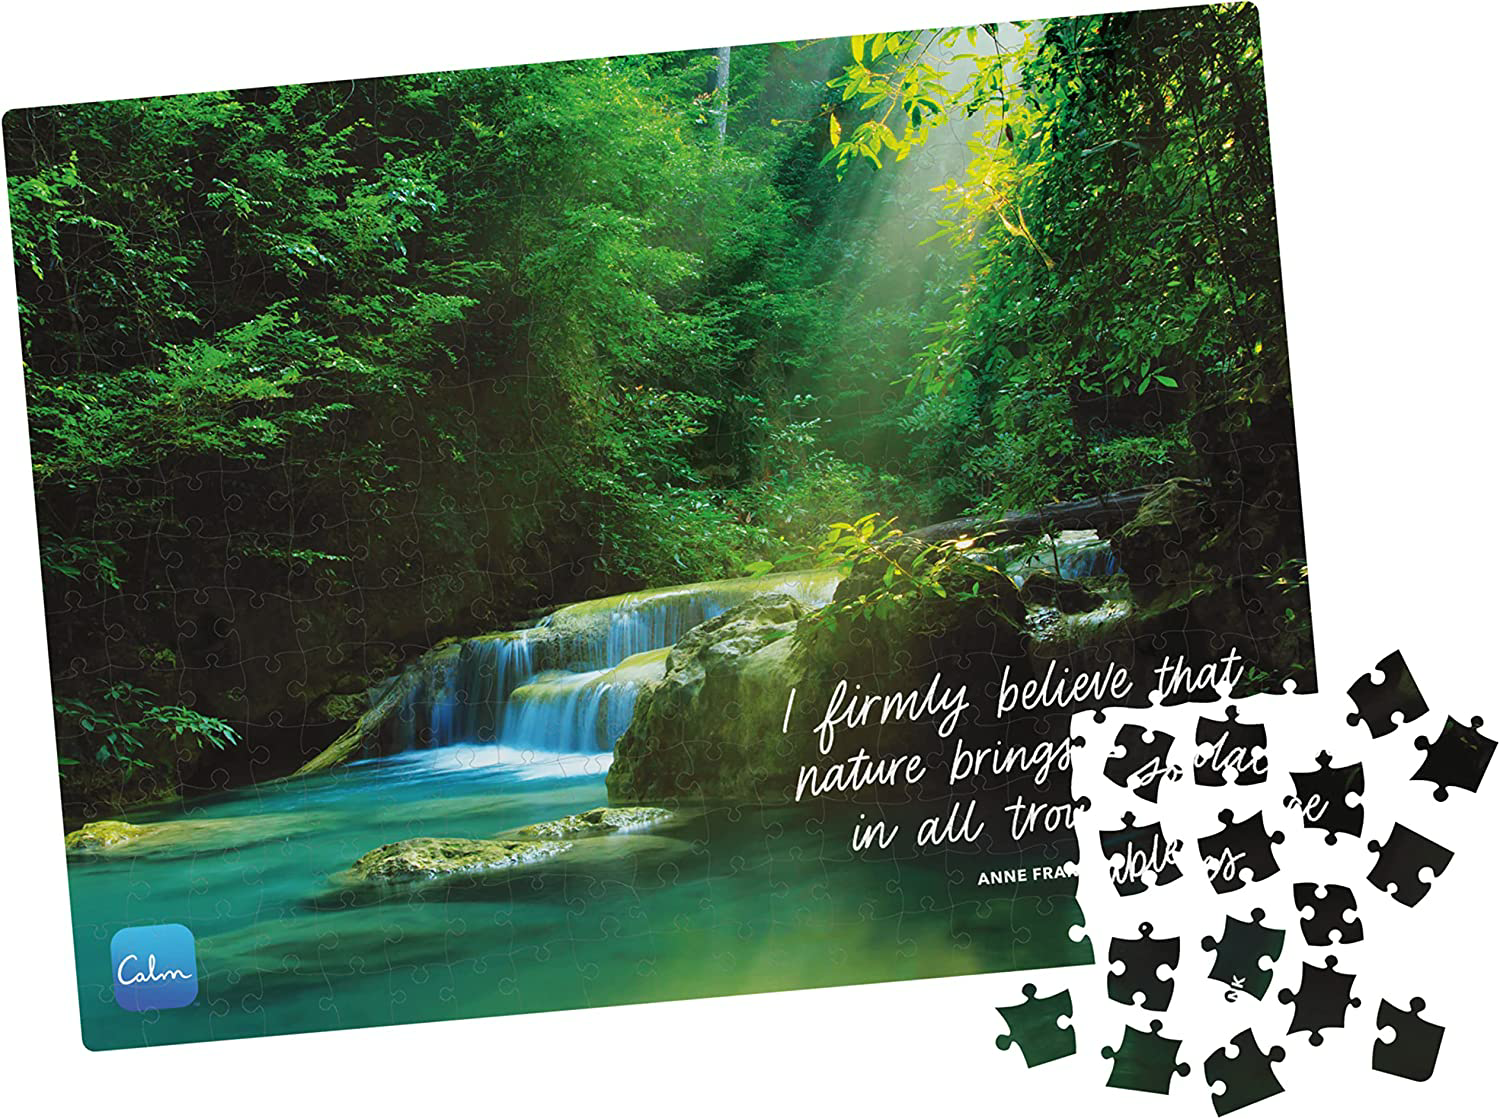 300-Piece Calm Jigsaw Puzzle for Relaxation, Stress Relief, and Mood Elevation, for Adults and Kids Ages 8 and up, Hidden Waterfalls $3.86